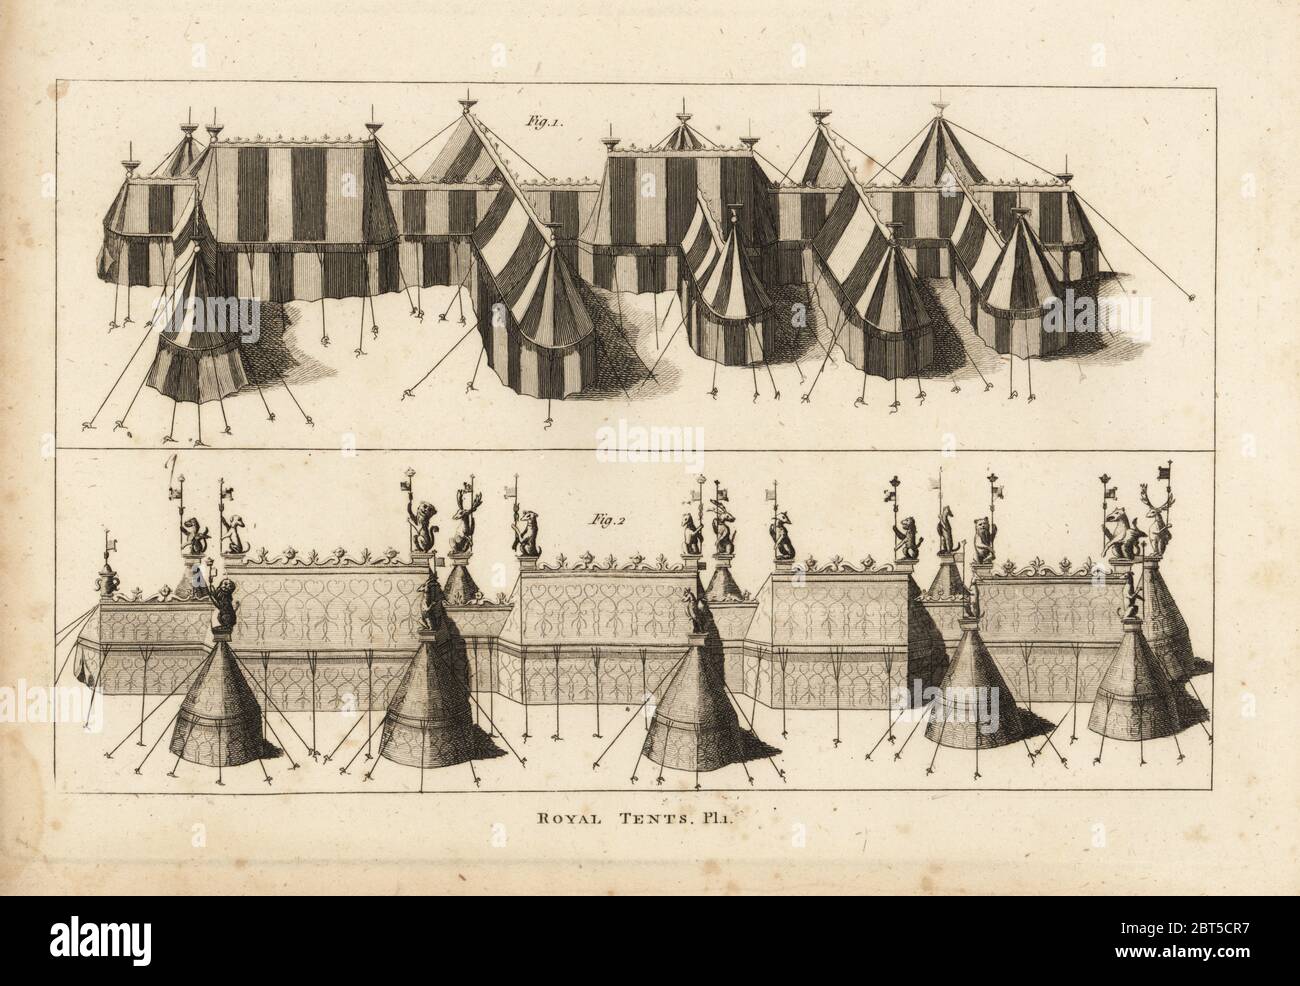 Royal tents pitched for the meeting of King Henry VIII and King Francis I of France near Ardres 1520. Copperplate engraving after the Cotton Collection, Augustus II, from Francis Grose's Military Antiquities respecting a History of the English Army, Stockdale, London, 1812. Stock Photo